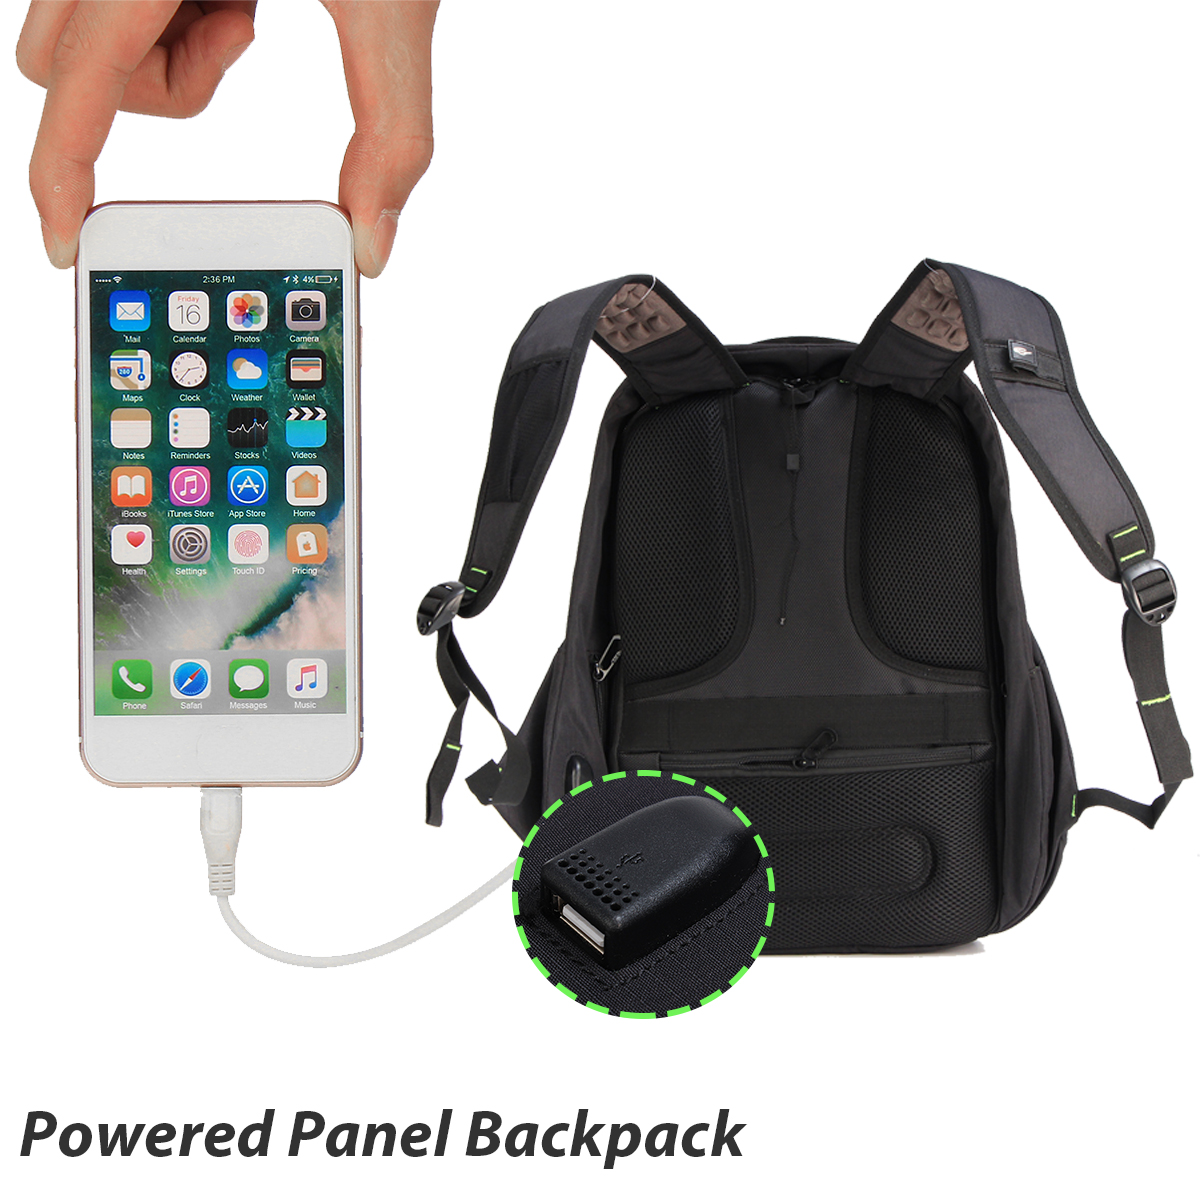 16-inch-Waterproof-Solar-Panel-Backpack-Laptop-USB-Charger-Outdoor-Travel-Camping-Bags-1244084-4